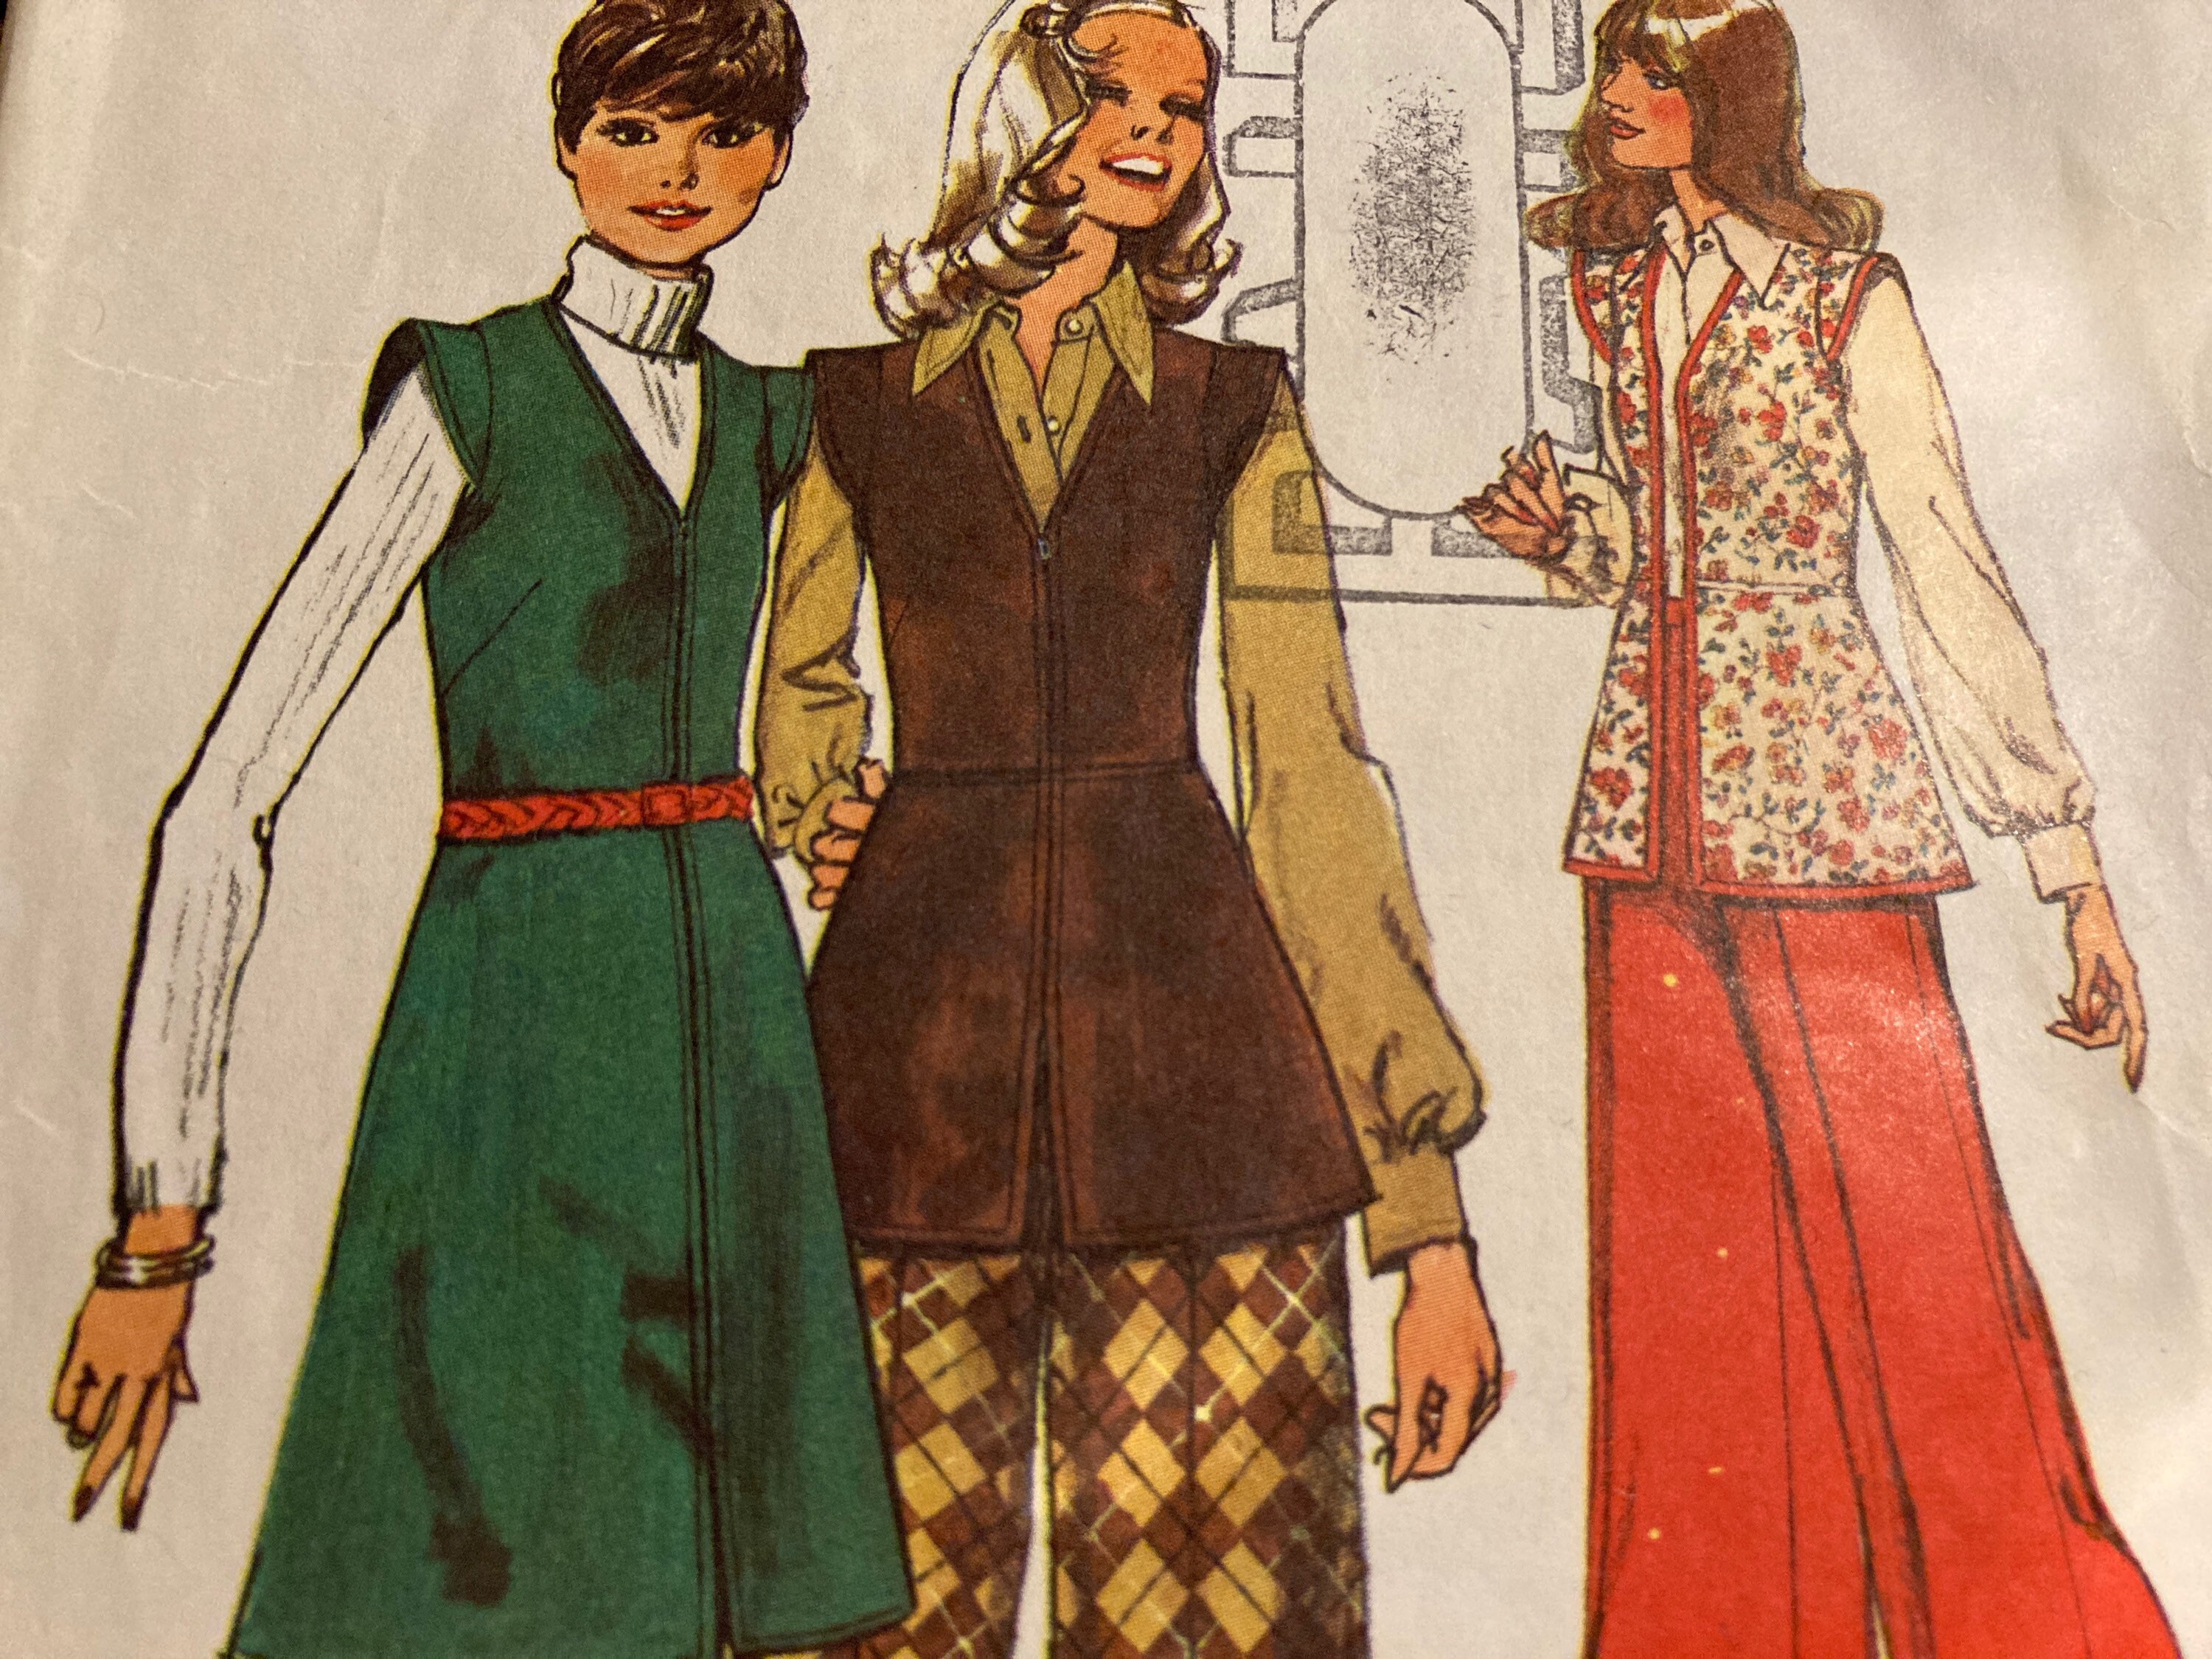 Vintage 1970s simplicity 5801 sewing pattern